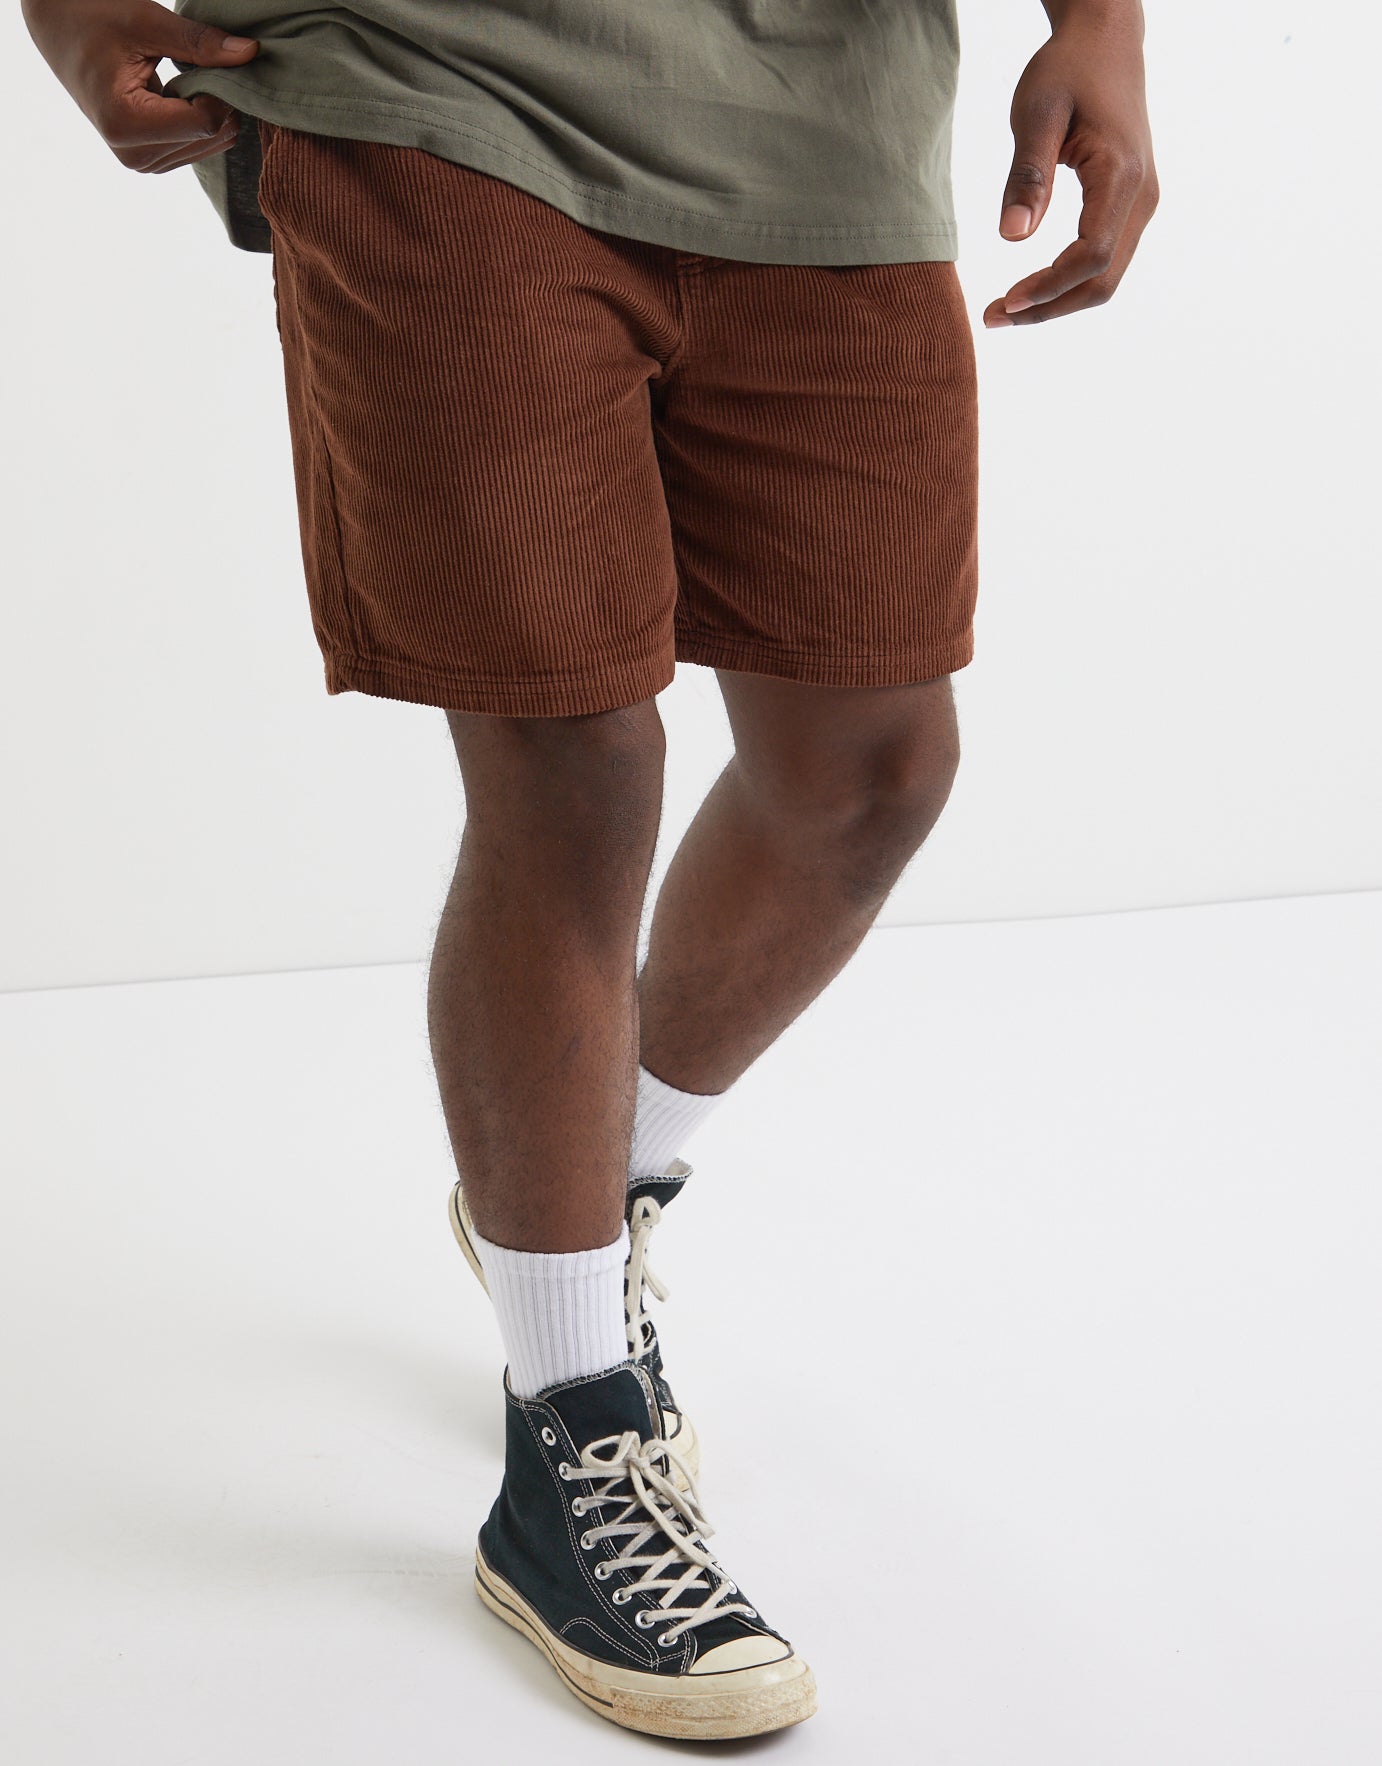 Acceptable Compromise Corduroy Shorts (Dark Chocolate)